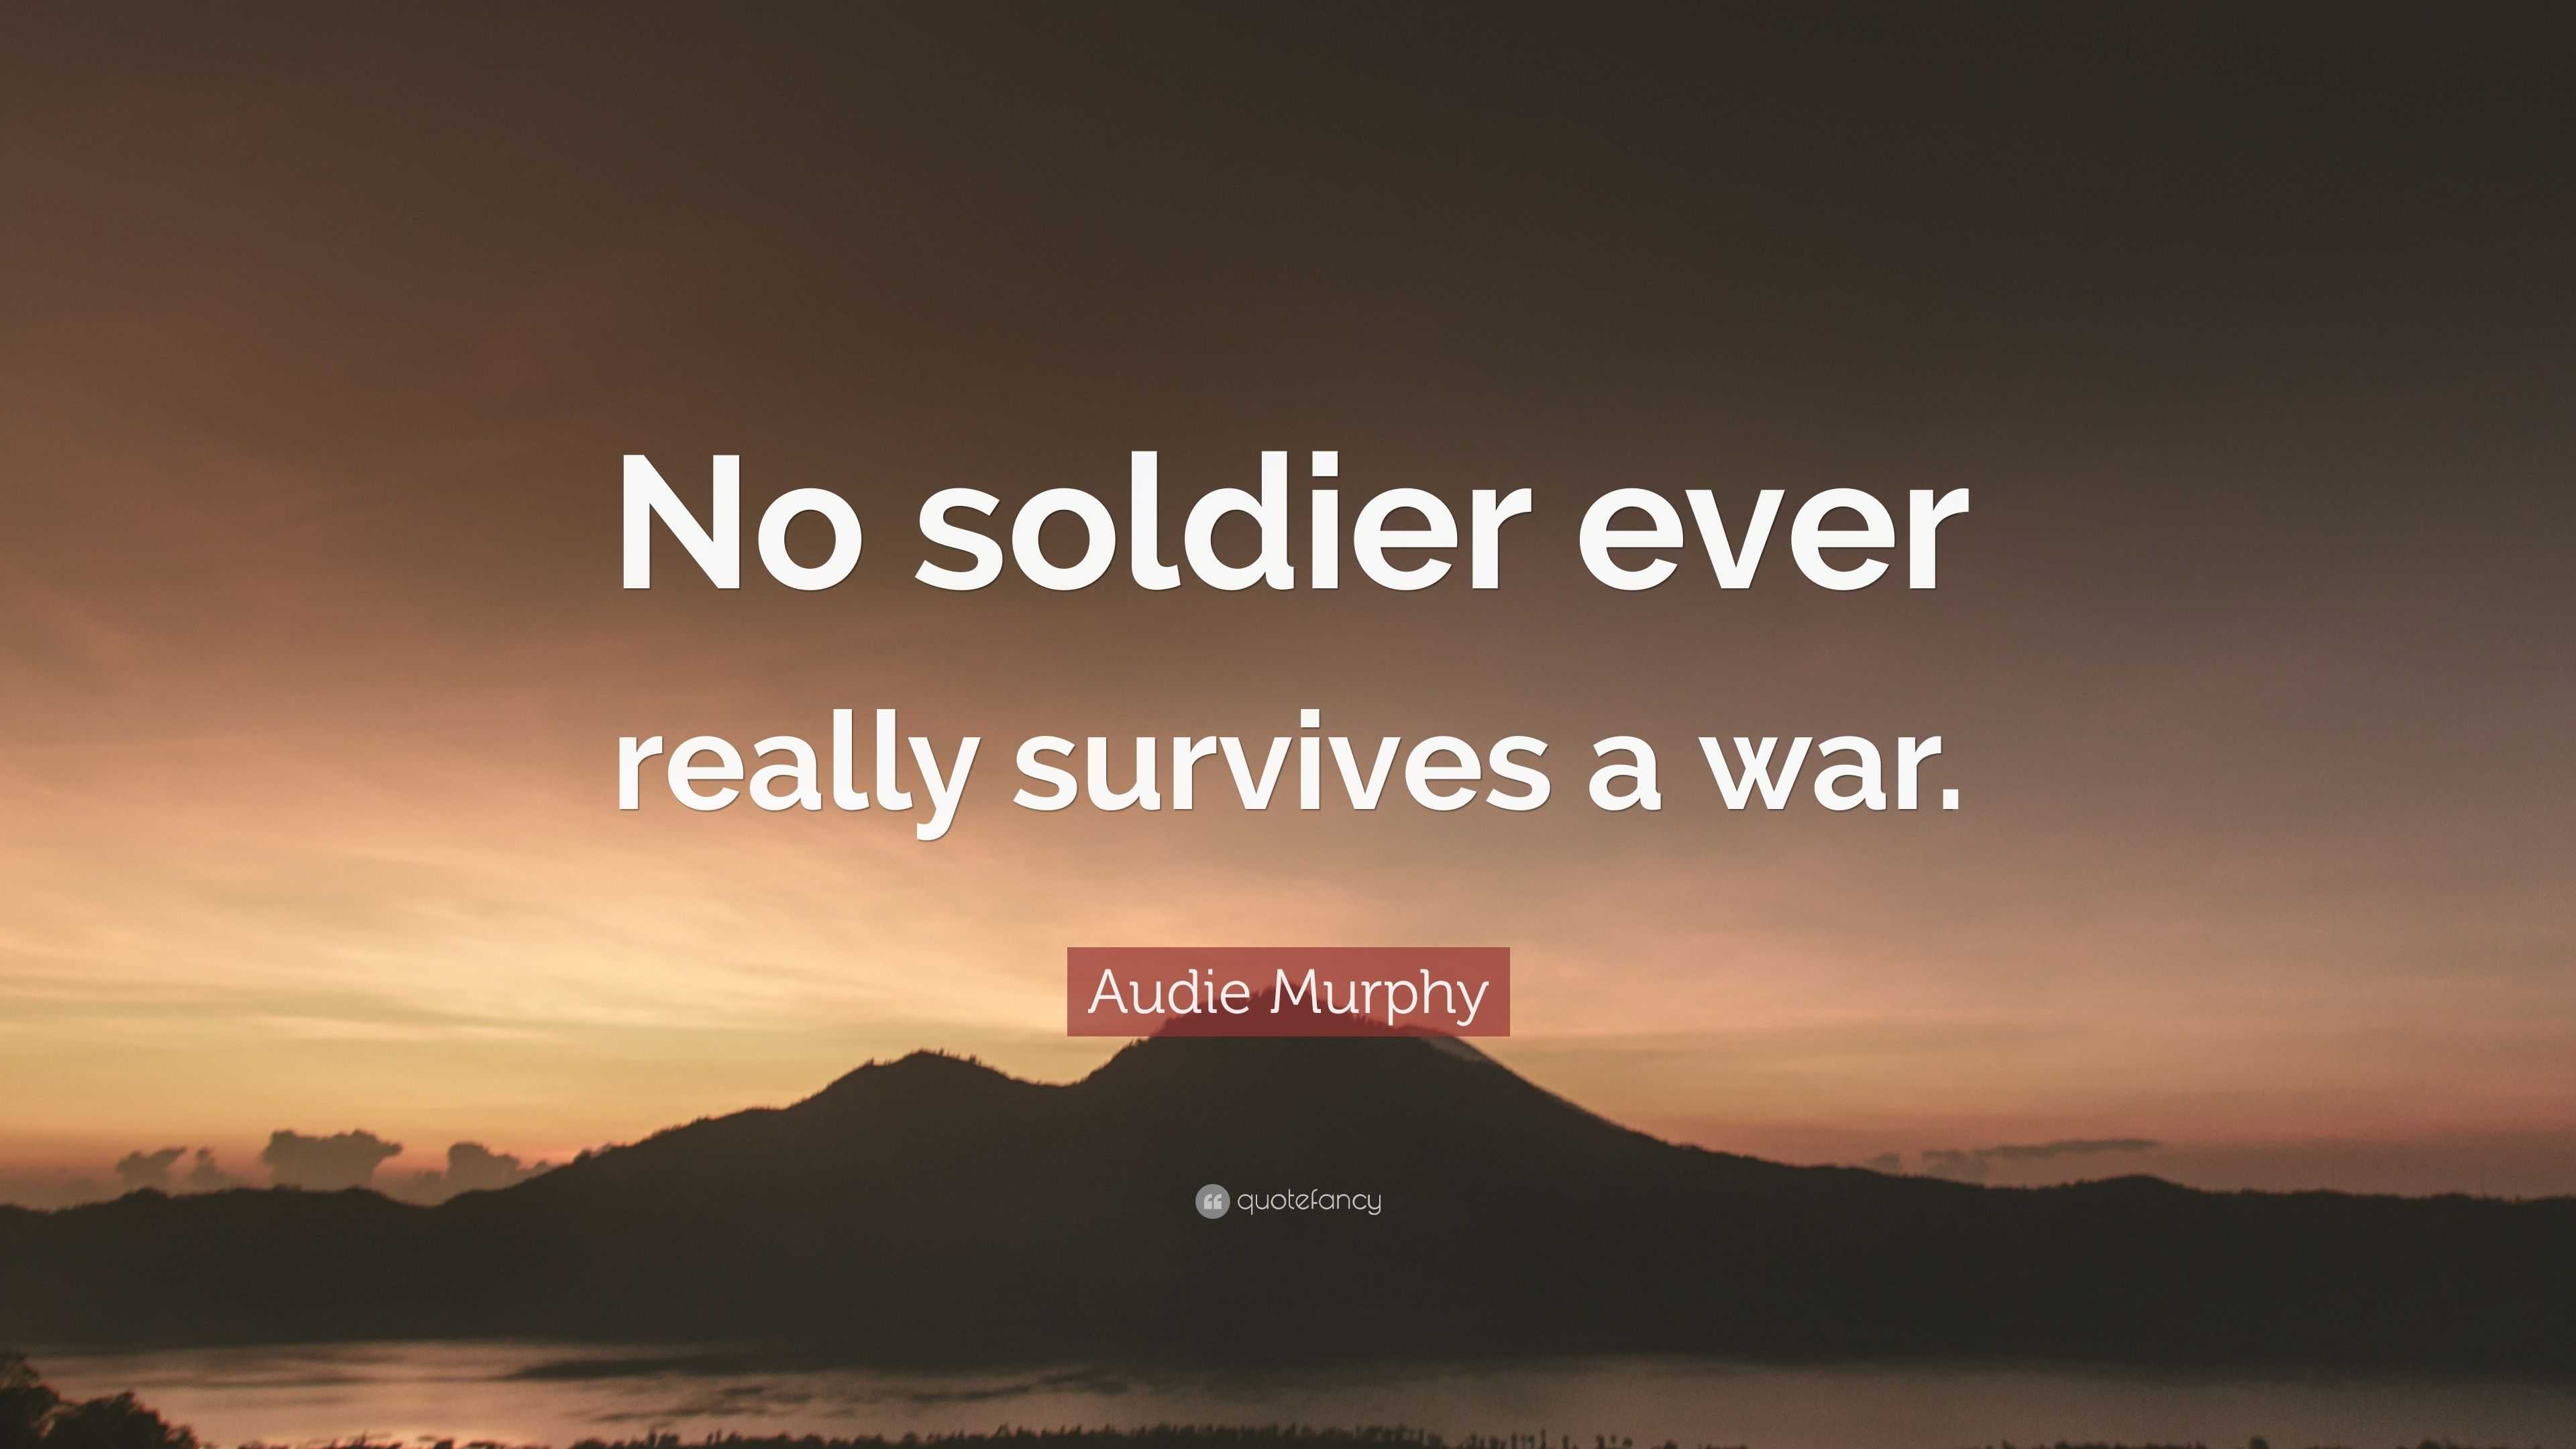 Audie Murphy Quote: “No soldier ever really survives a war.”